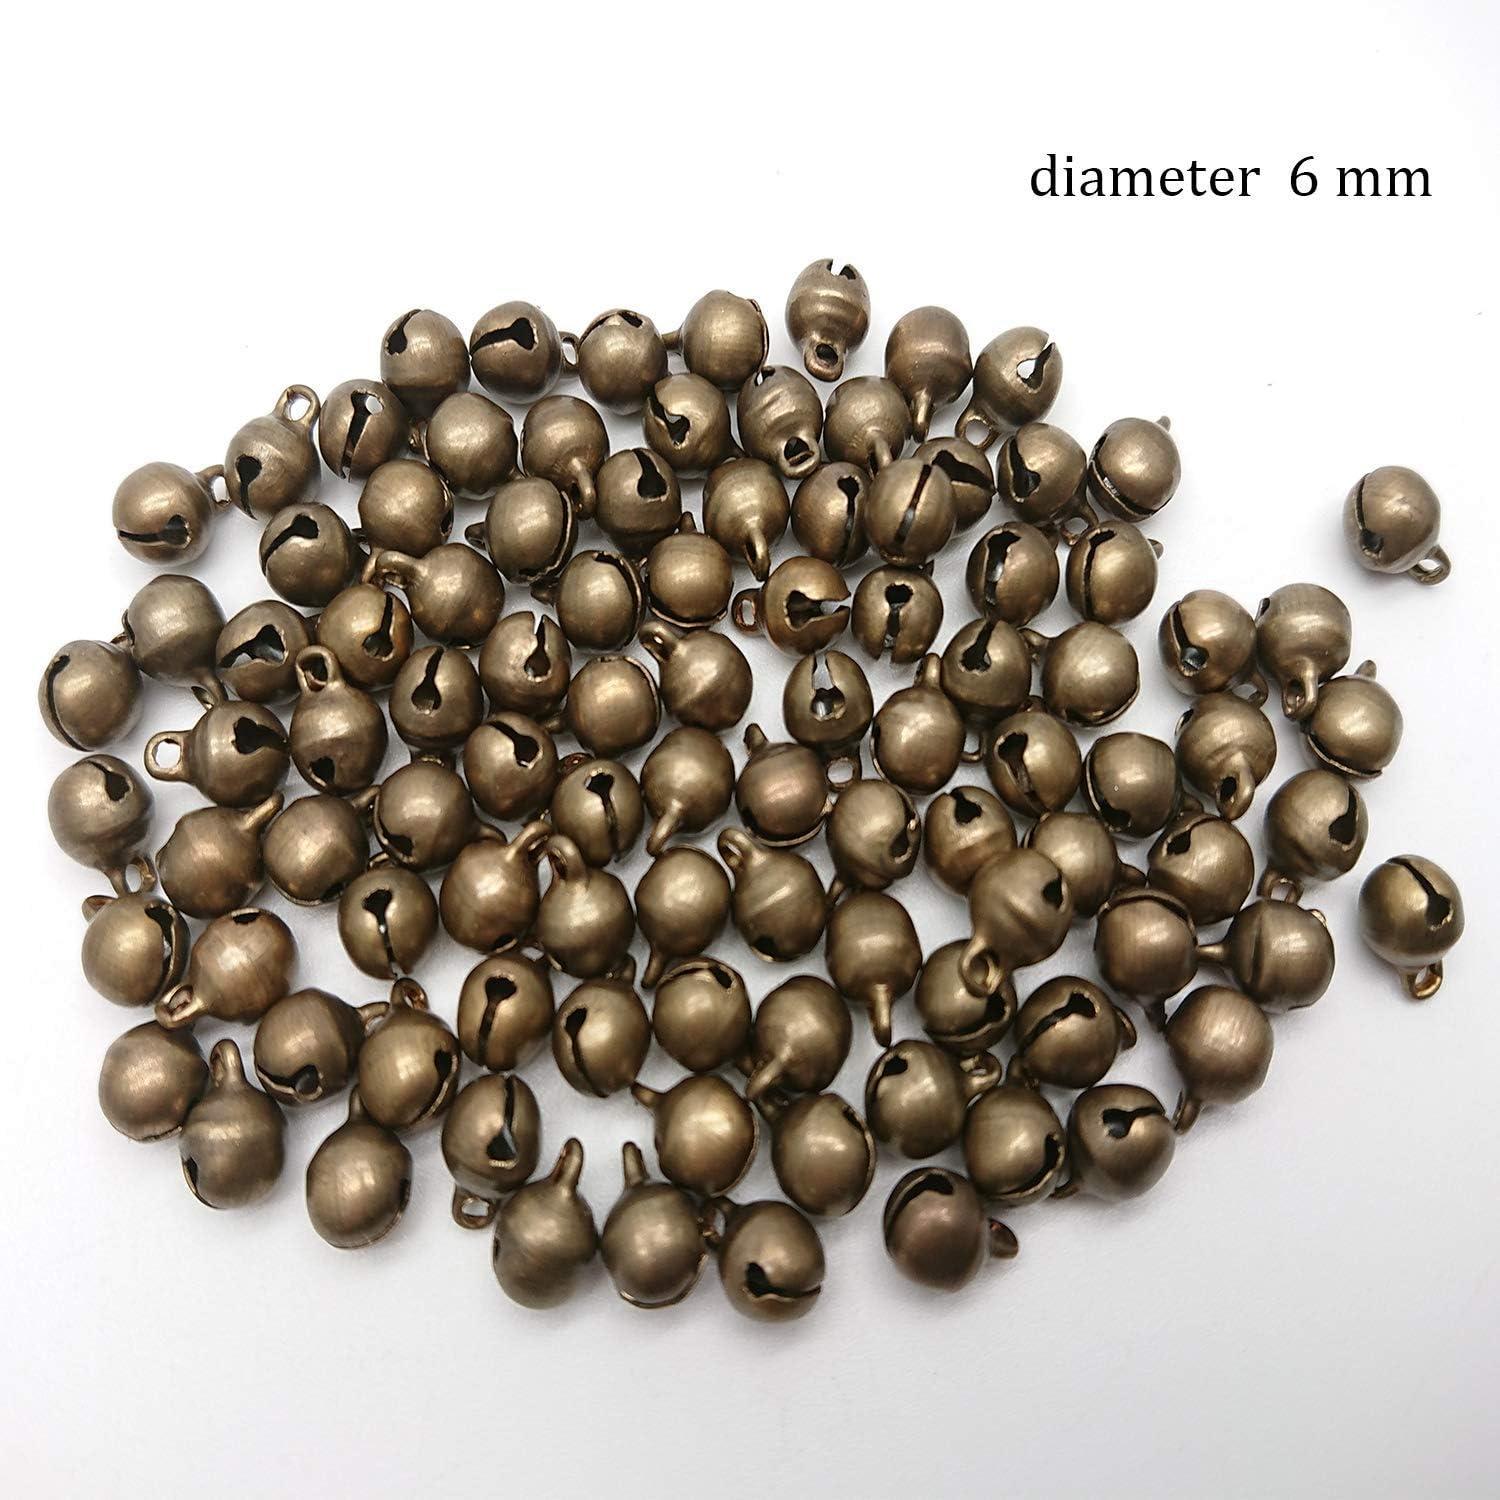 Bells 100 pieces 6mm Gold color Steel Jewelry Craft Supplies